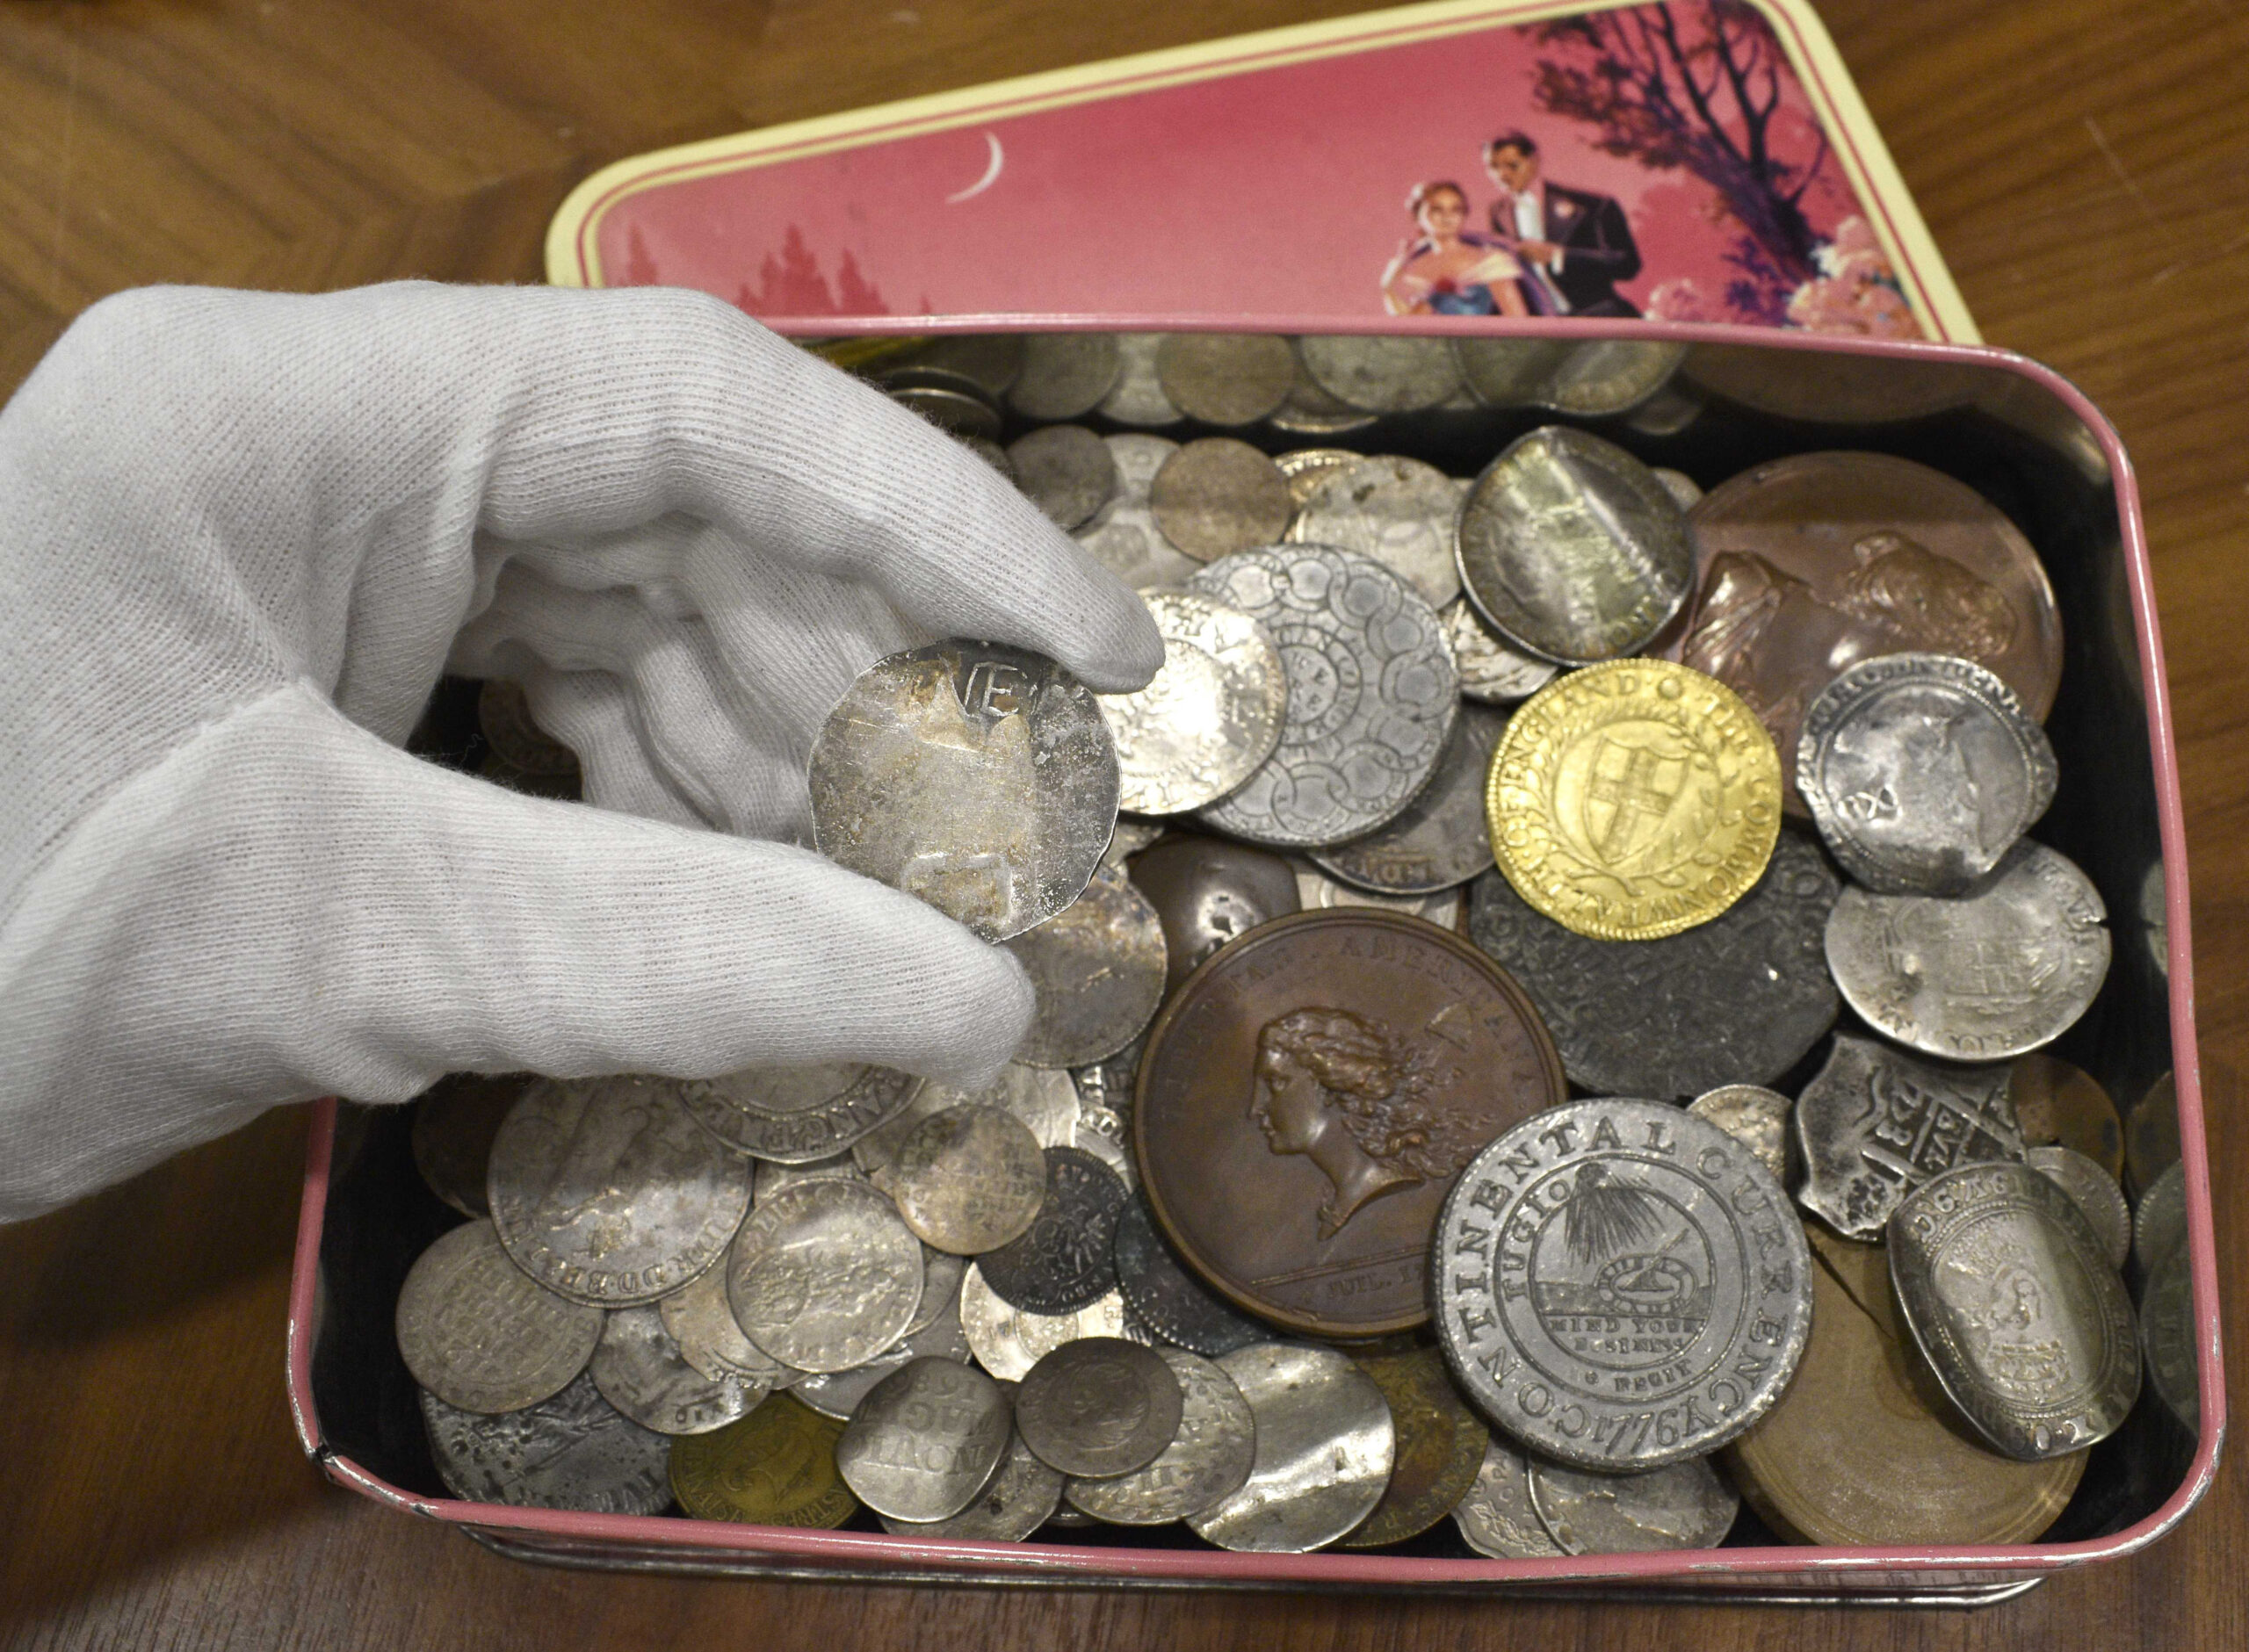 In this Sept. 9, 2021 photo provided by auctioneer Morton & Eden Ltd., a rare 17th century one shilling coin is displayed above a metal box containing other coins, at the auction house, in London. Morton & Eden Ltd. says the extraordinarily rare coin, with a face value of just pennies when it was minted in mid-17th century New England, could sell for the equivalent of about $300,000 when it's put up for auction in London next month. (Menelaos Danellis/Morton & Eden Ltd. via AP)